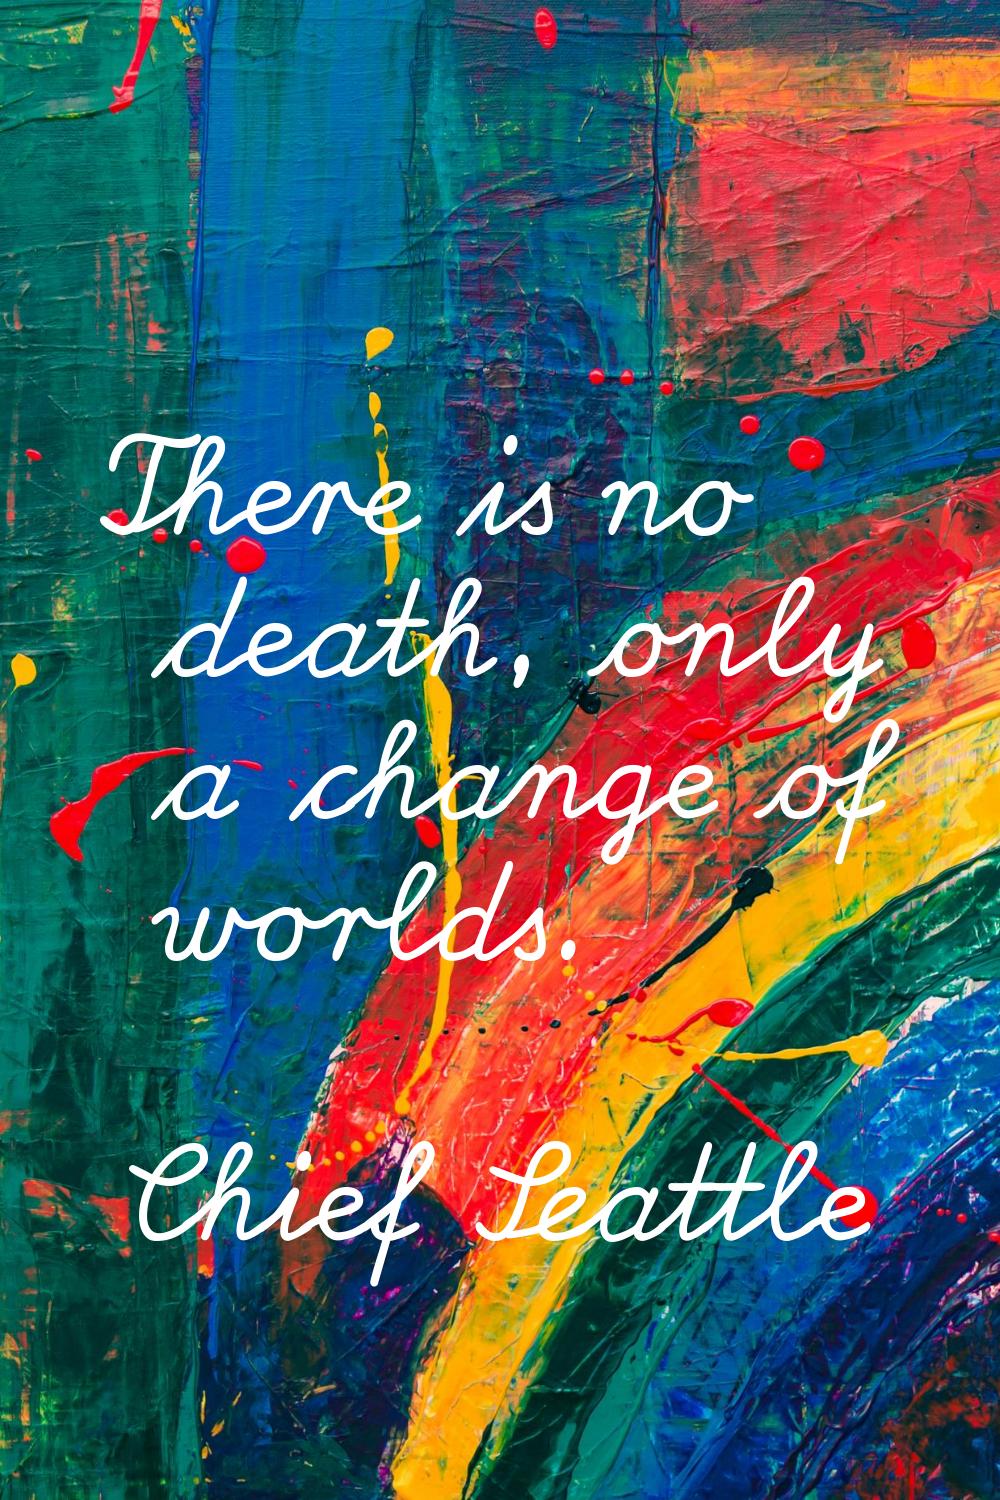 There is no death, only a change of worlds.